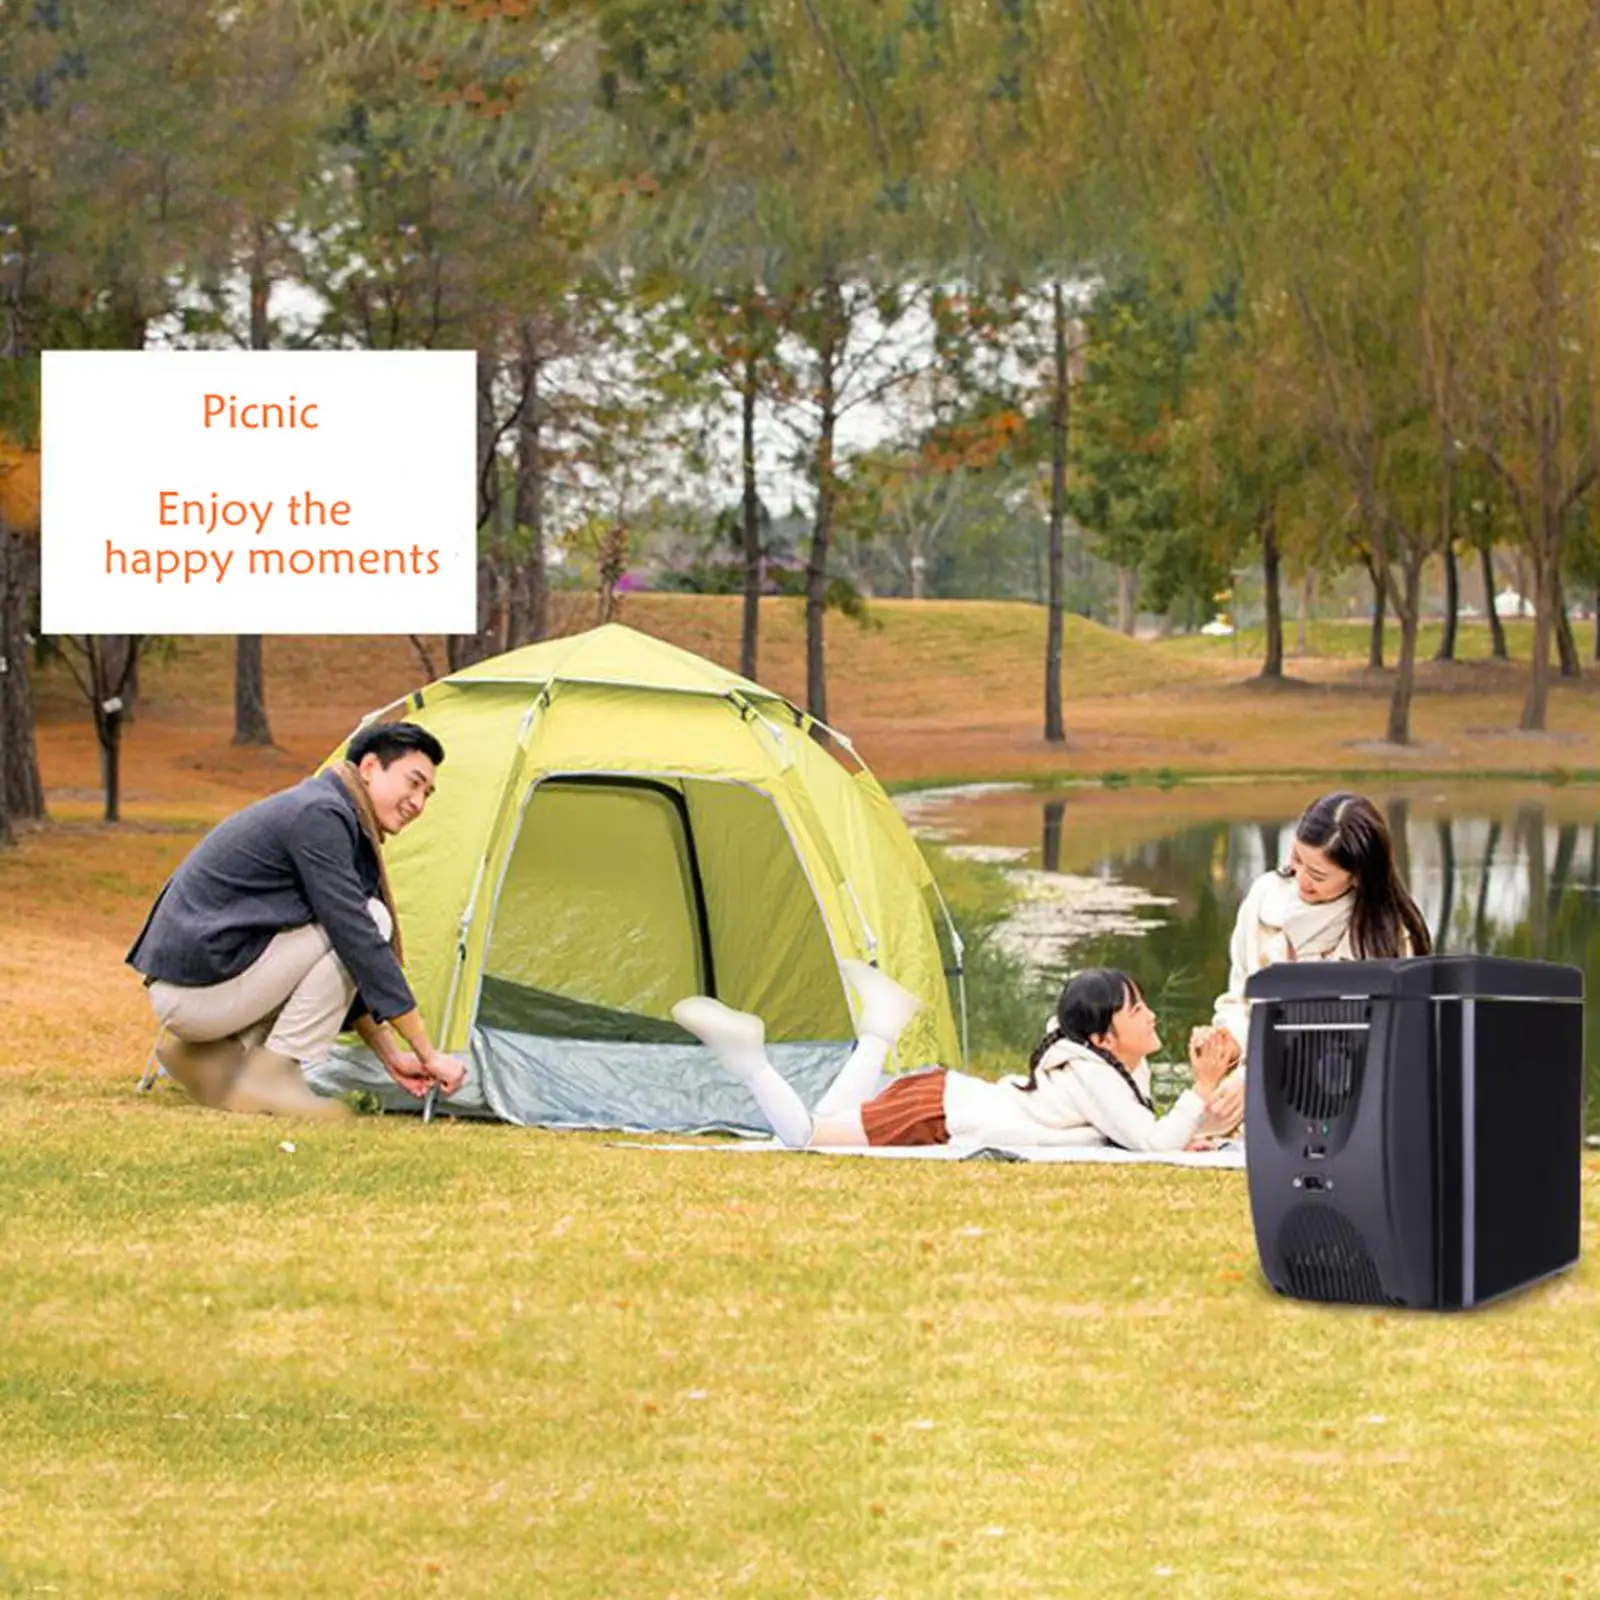 Portable Mini Fridge Warmer Cooler Low Noize Dual Using 12V 6L Small Refrigerator for Travel Outdoor Camping Cosmetics Food